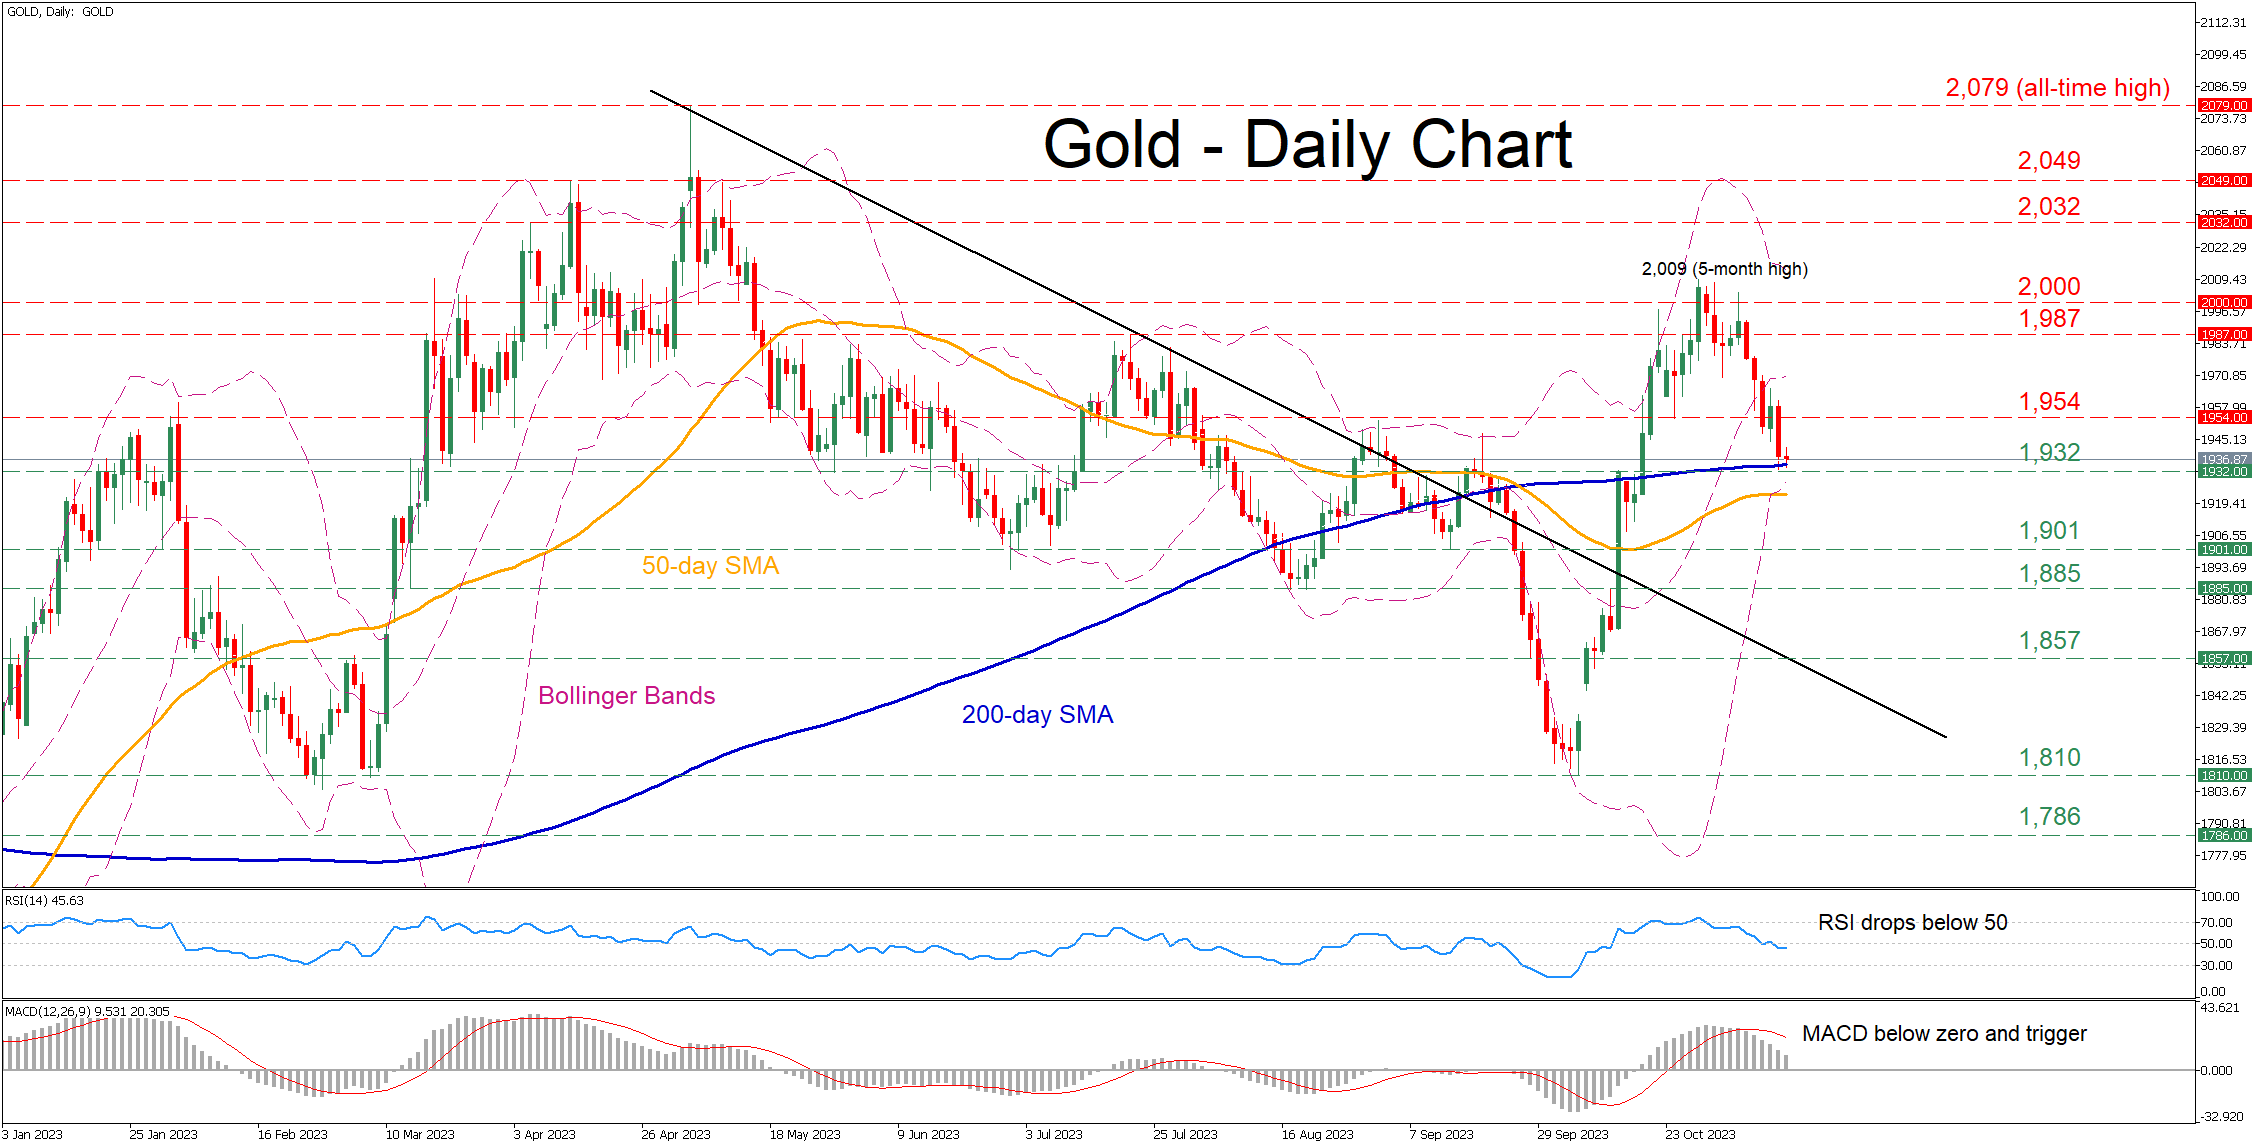 Gold's Volatile Journey: From Five-Month High to SMA-Defined Crossroads